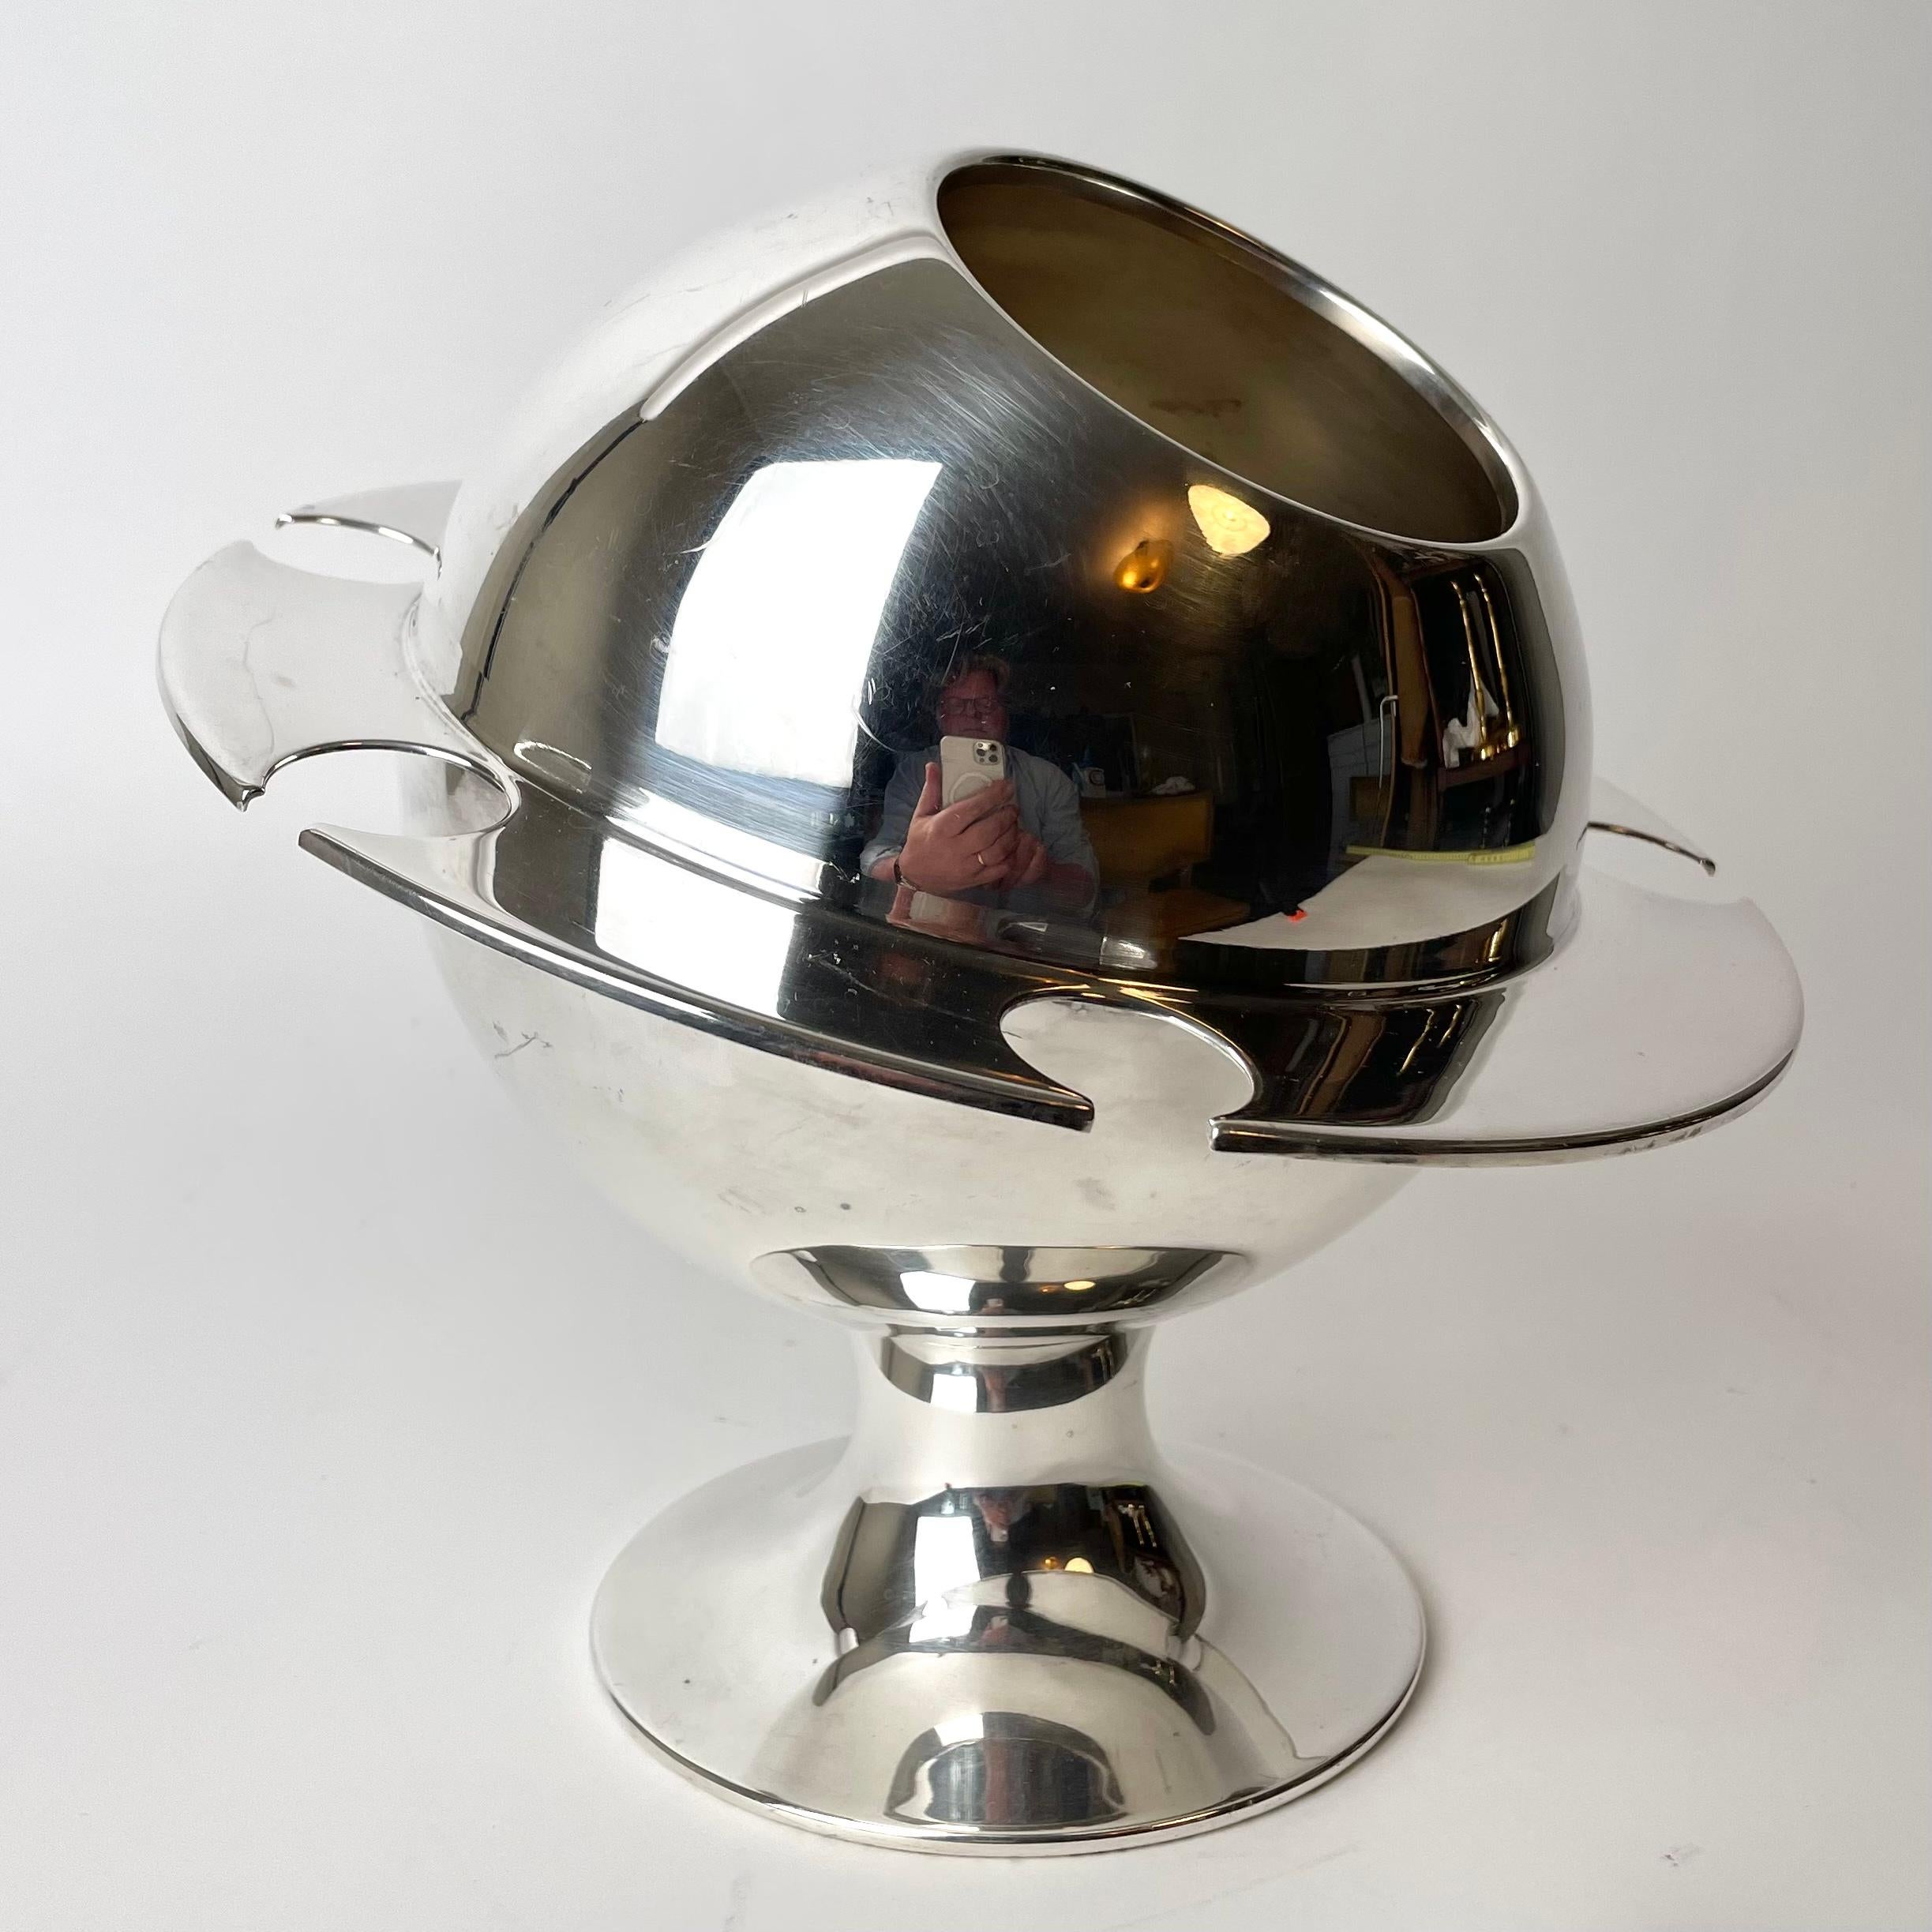 Cool Champagne Cooler with glass rack in silver plating. Glass rack for six glasses.

”Space Age” made in cool design in France during the 1960s.

Wear consistent with age and use.